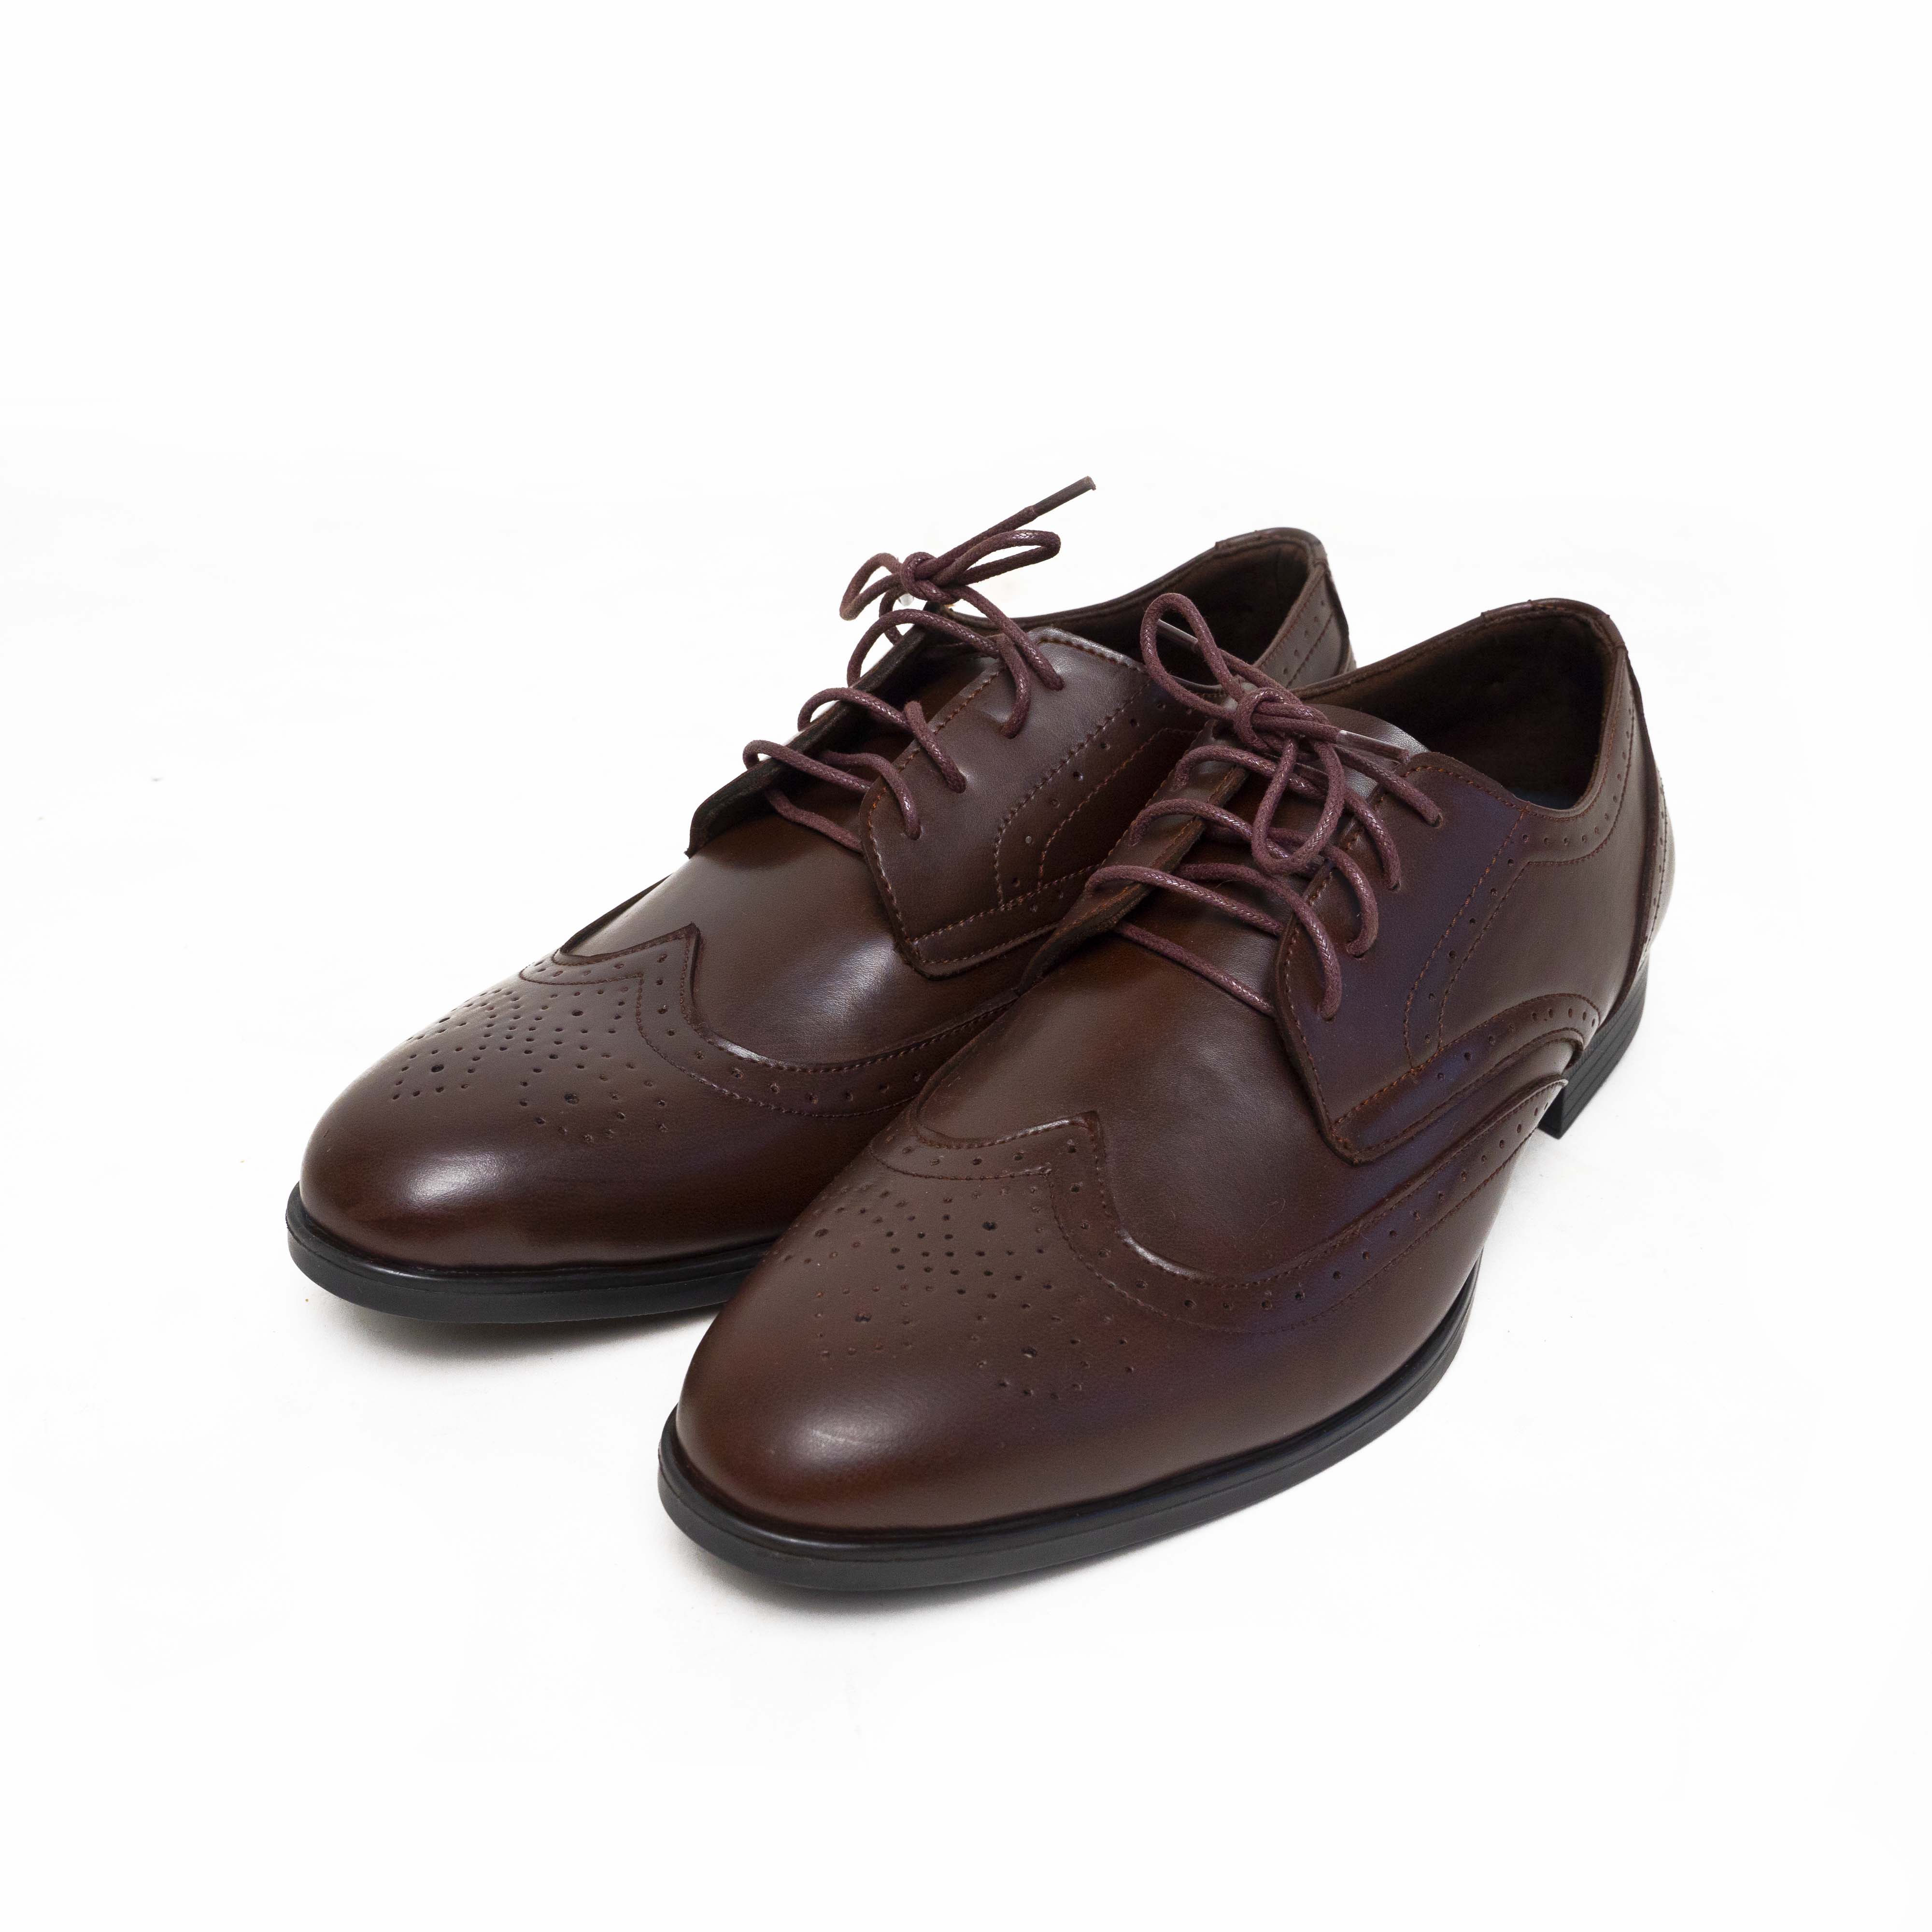 OXFORD WING TIP LEATHER SHOES DARK BROWN